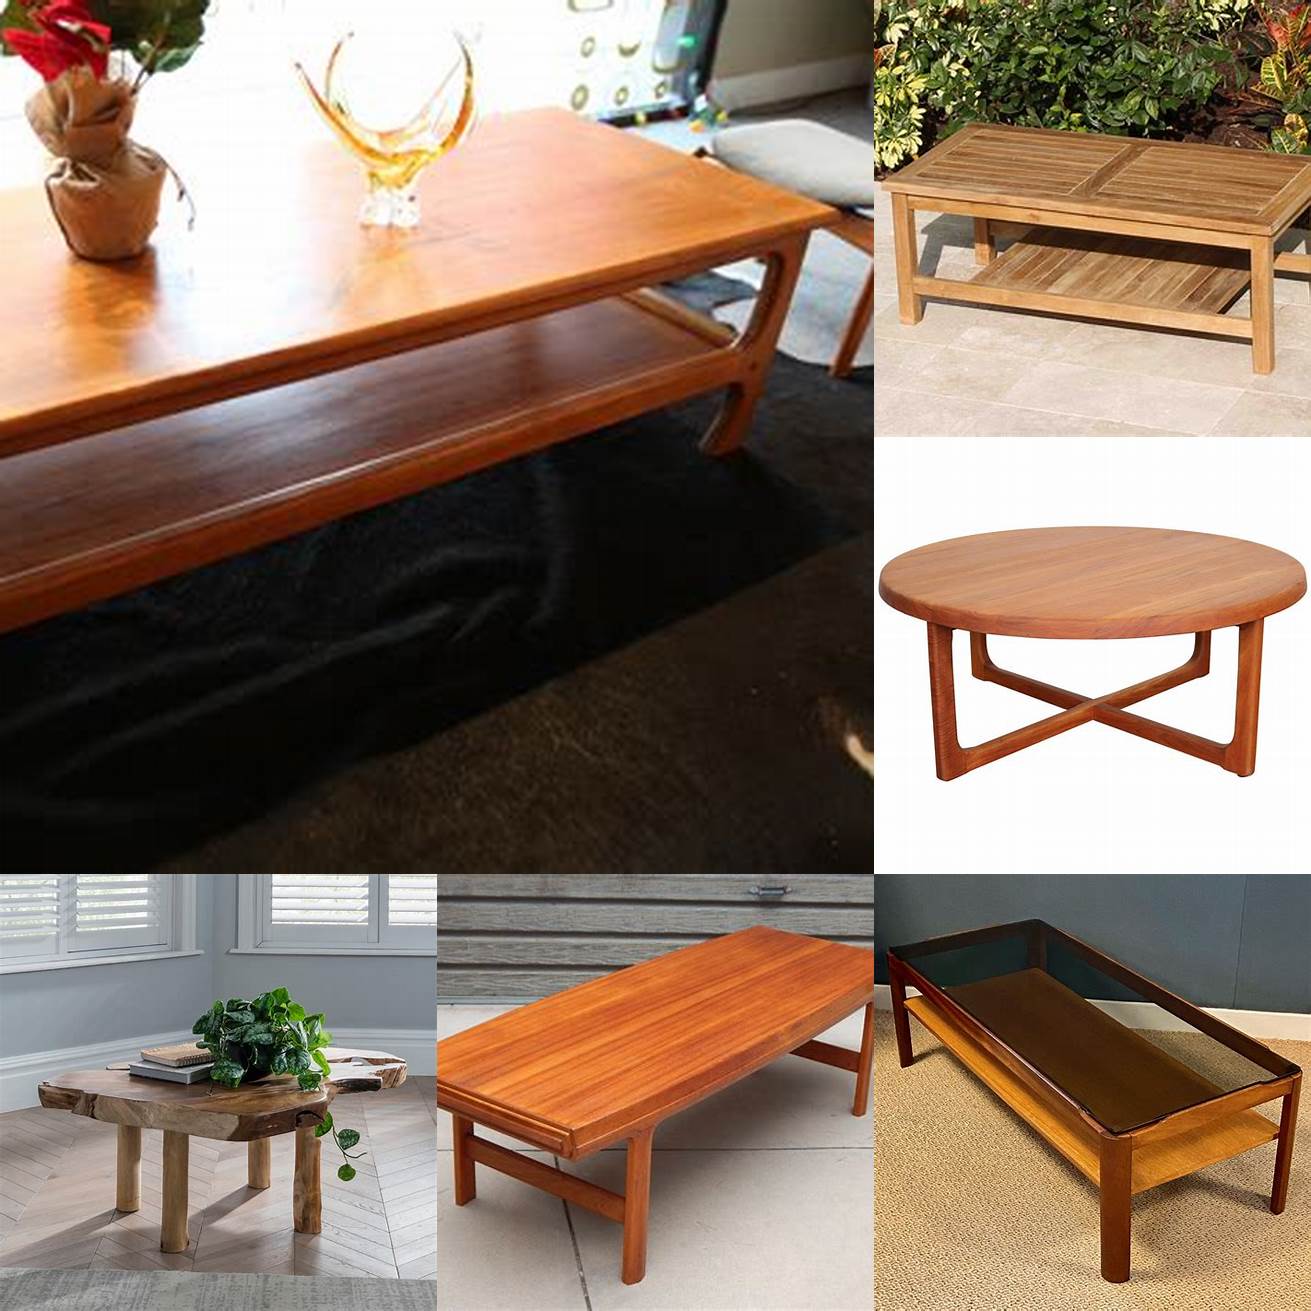 A picture of a teak coffee table